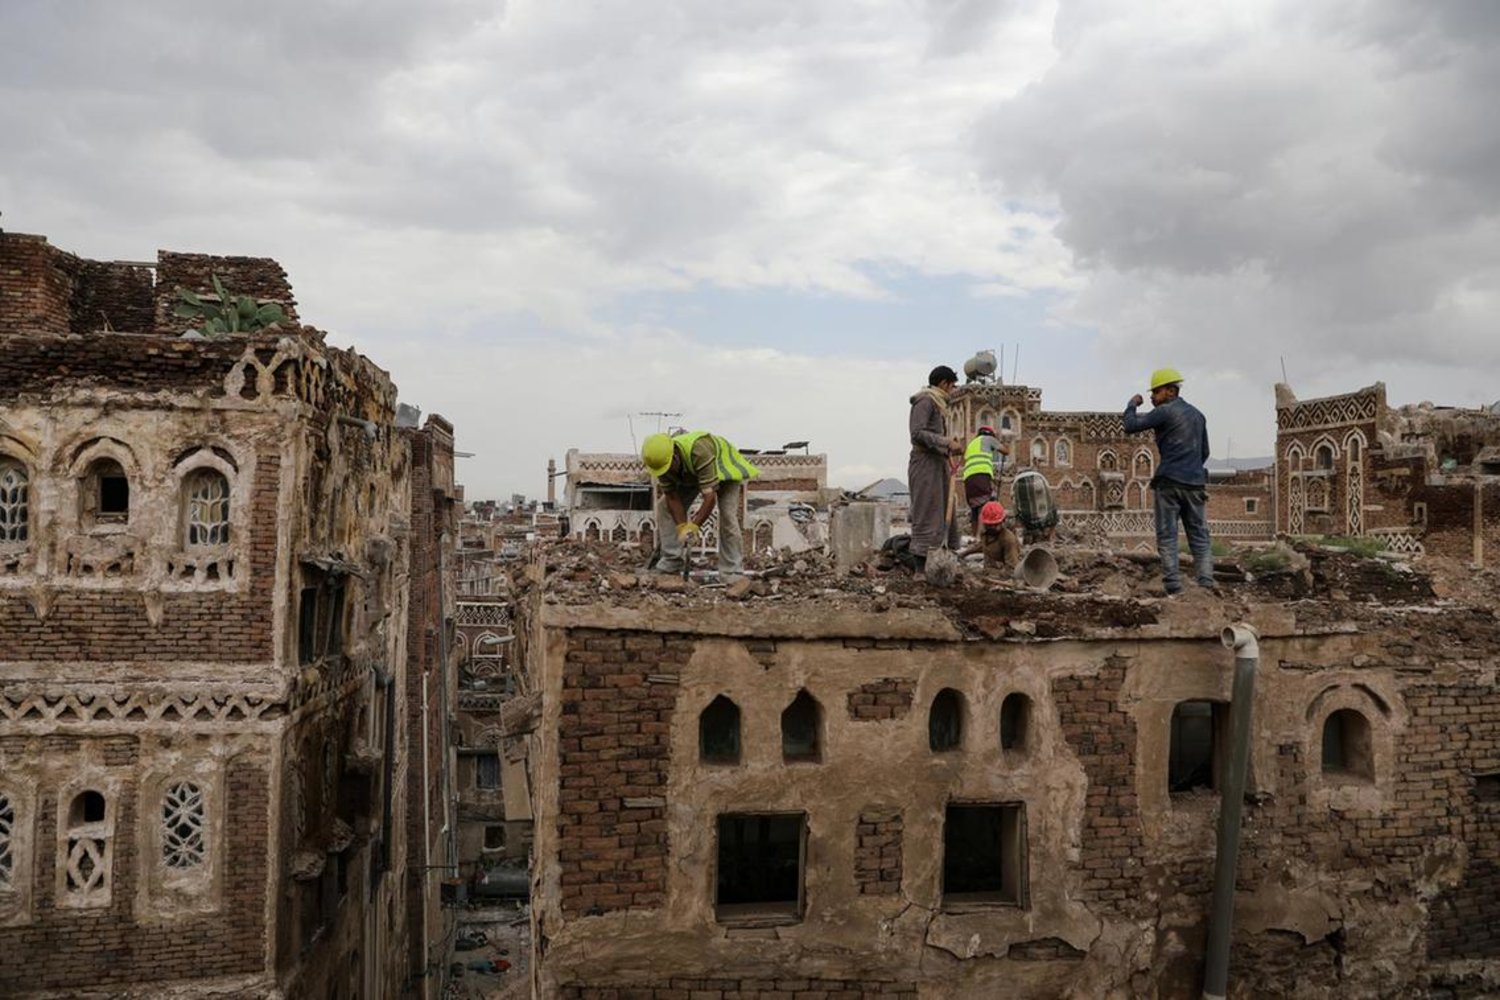 Workers clear rubble from a building damaged by rain in the Old City of Yemen's capital Sanaa on August 9, 2020. Reuters